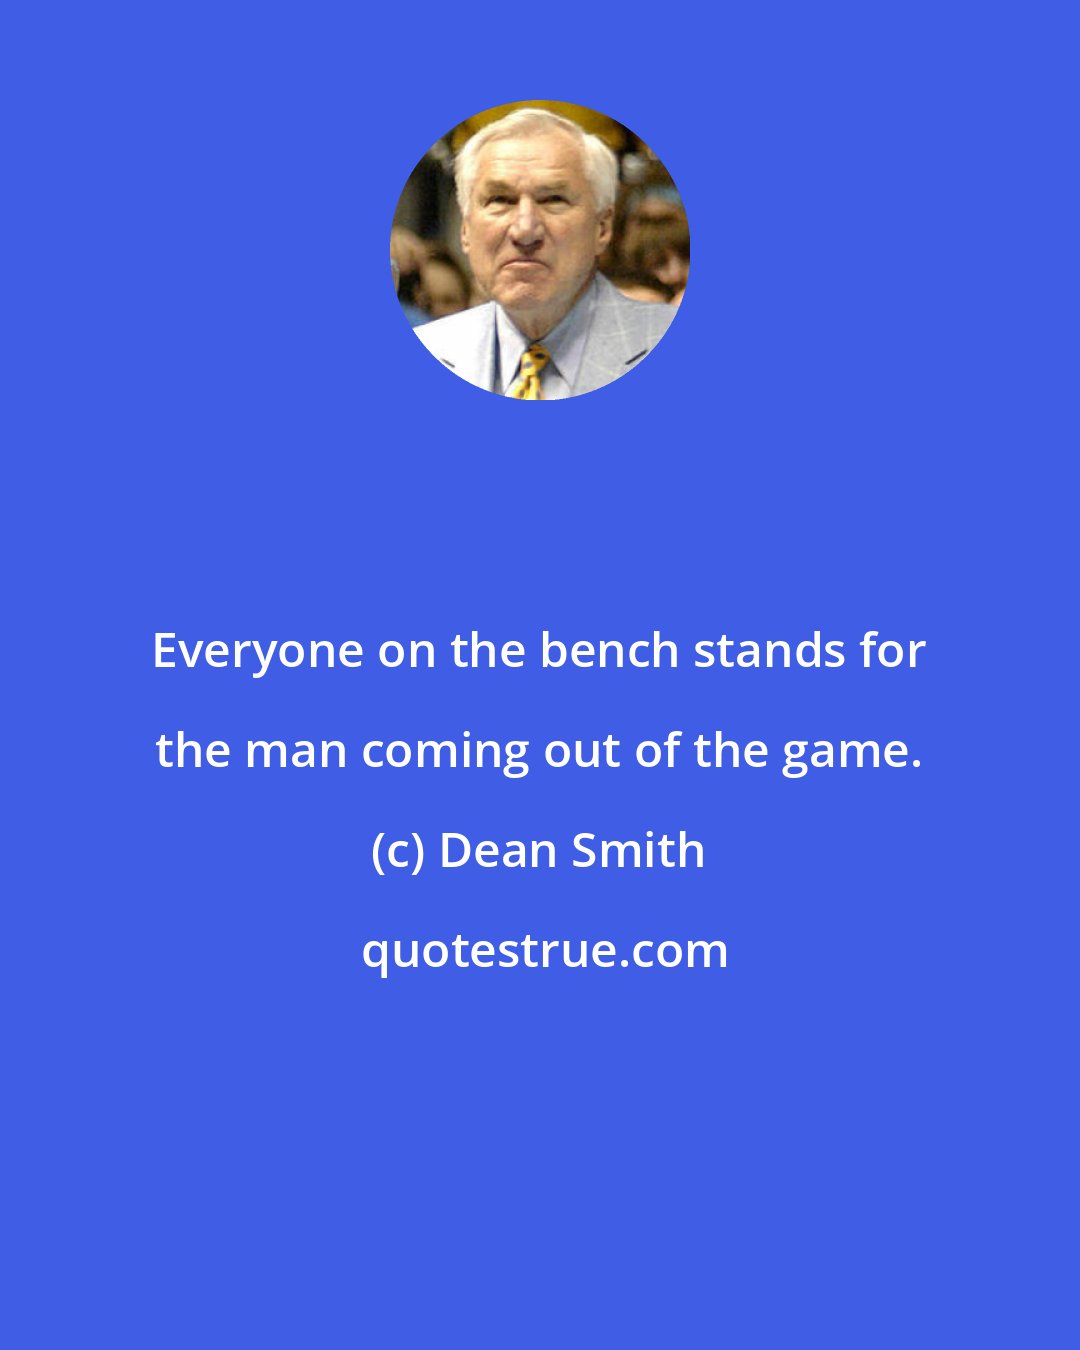 Dean Smith: Everyone on the bench stands for the man coming out of the game.